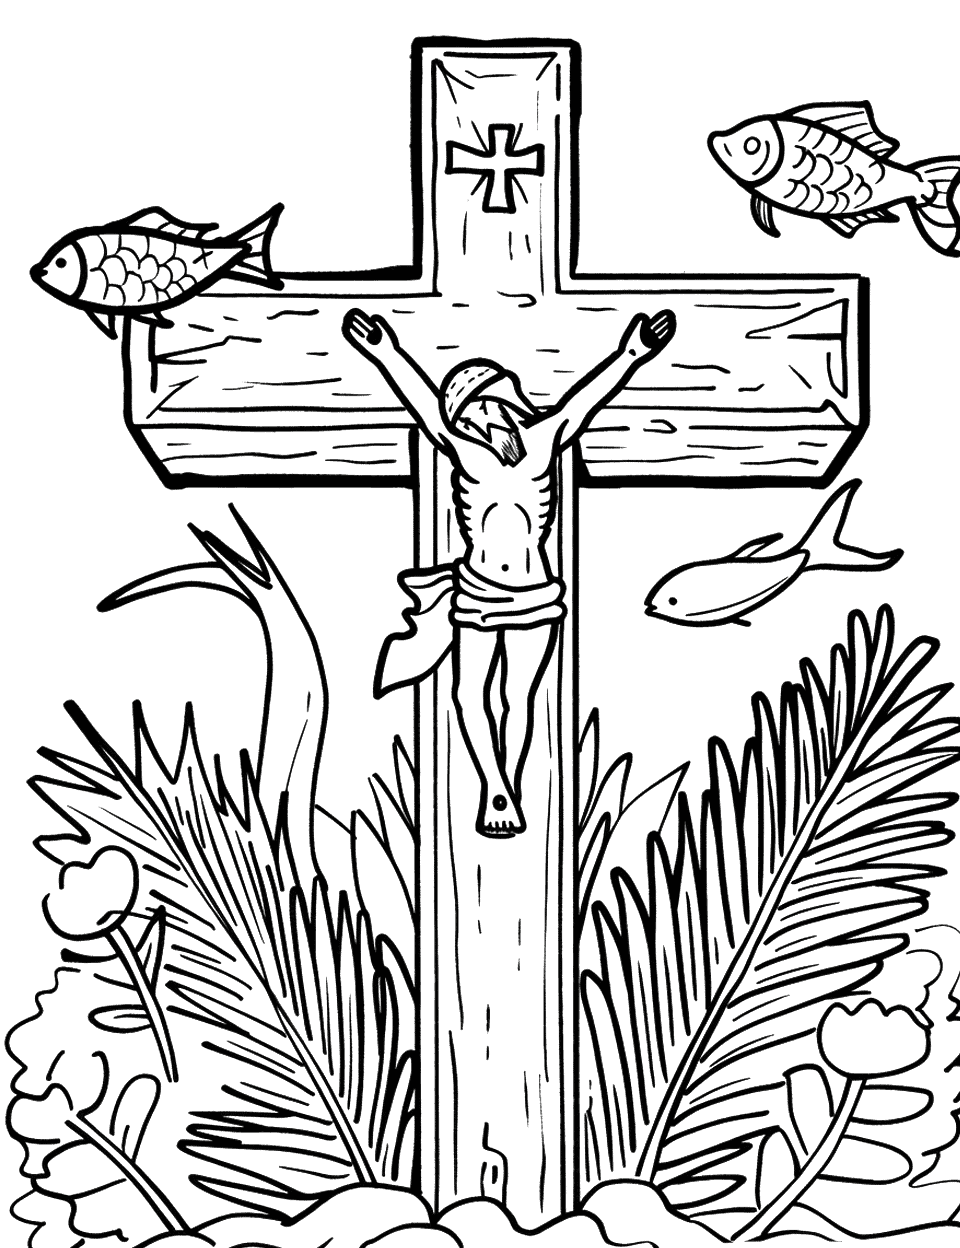 Lenten Cross with Symbols Coloring Page - A cross surrounded by symbols like Lent, like fish and palms.